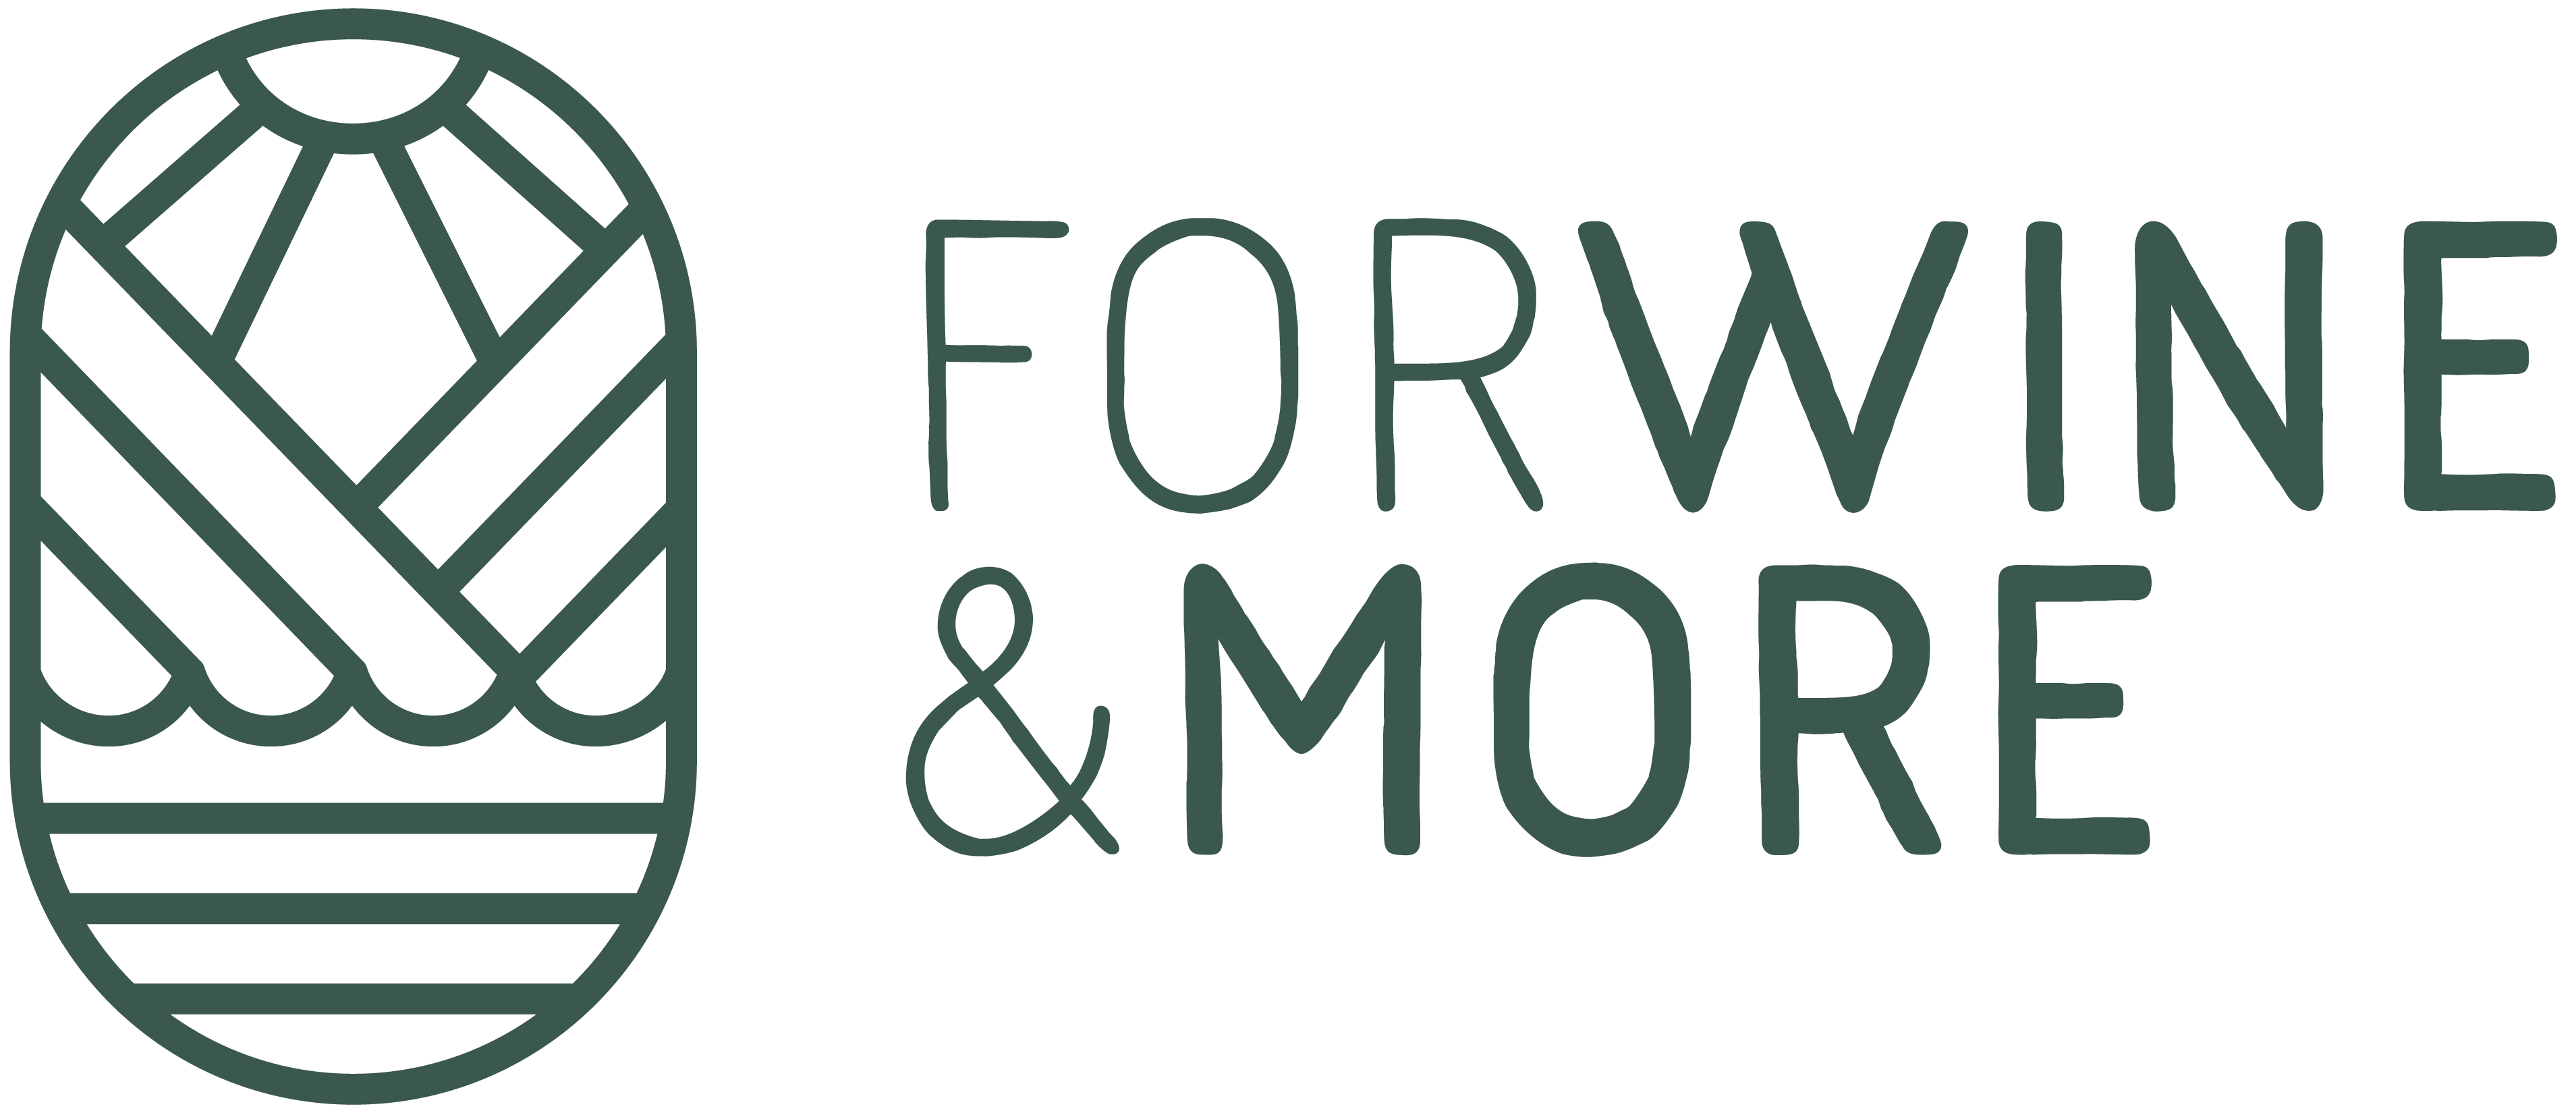 Forwine & More